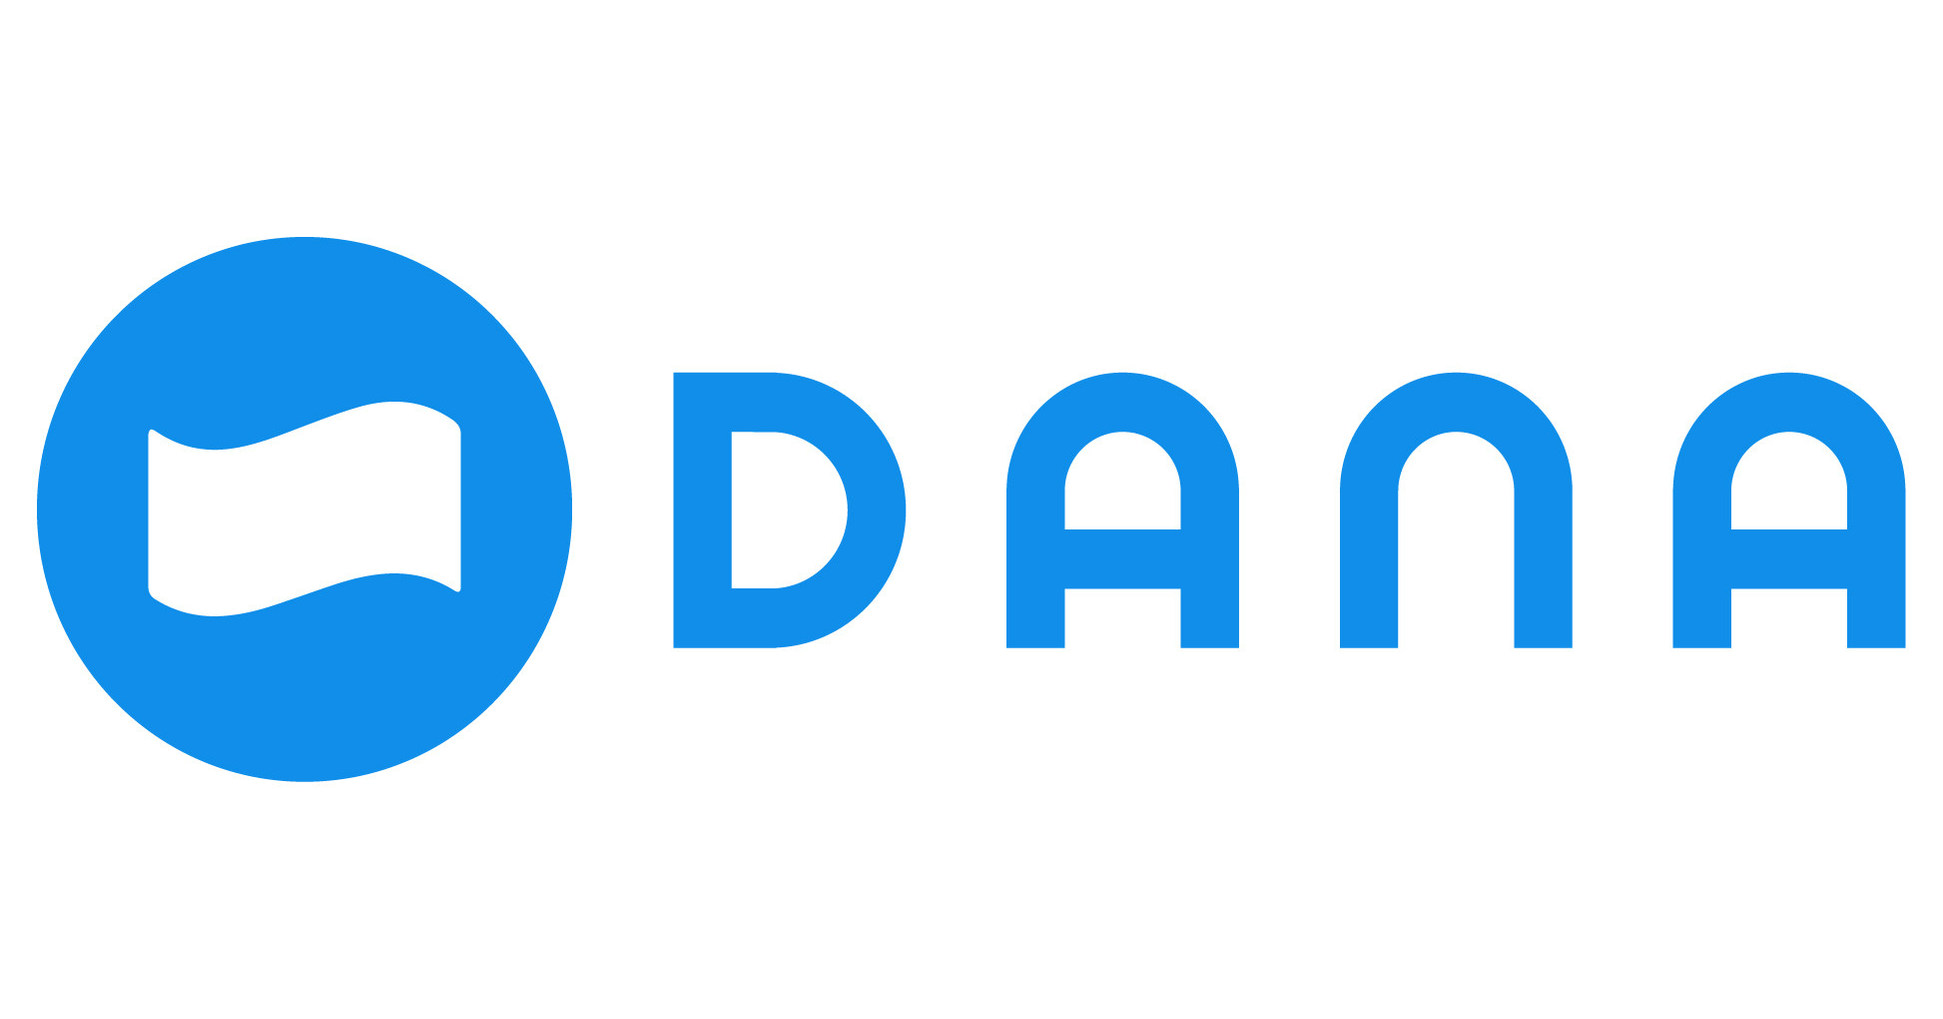 DANA EWallet is now available as a payment method for the App Store